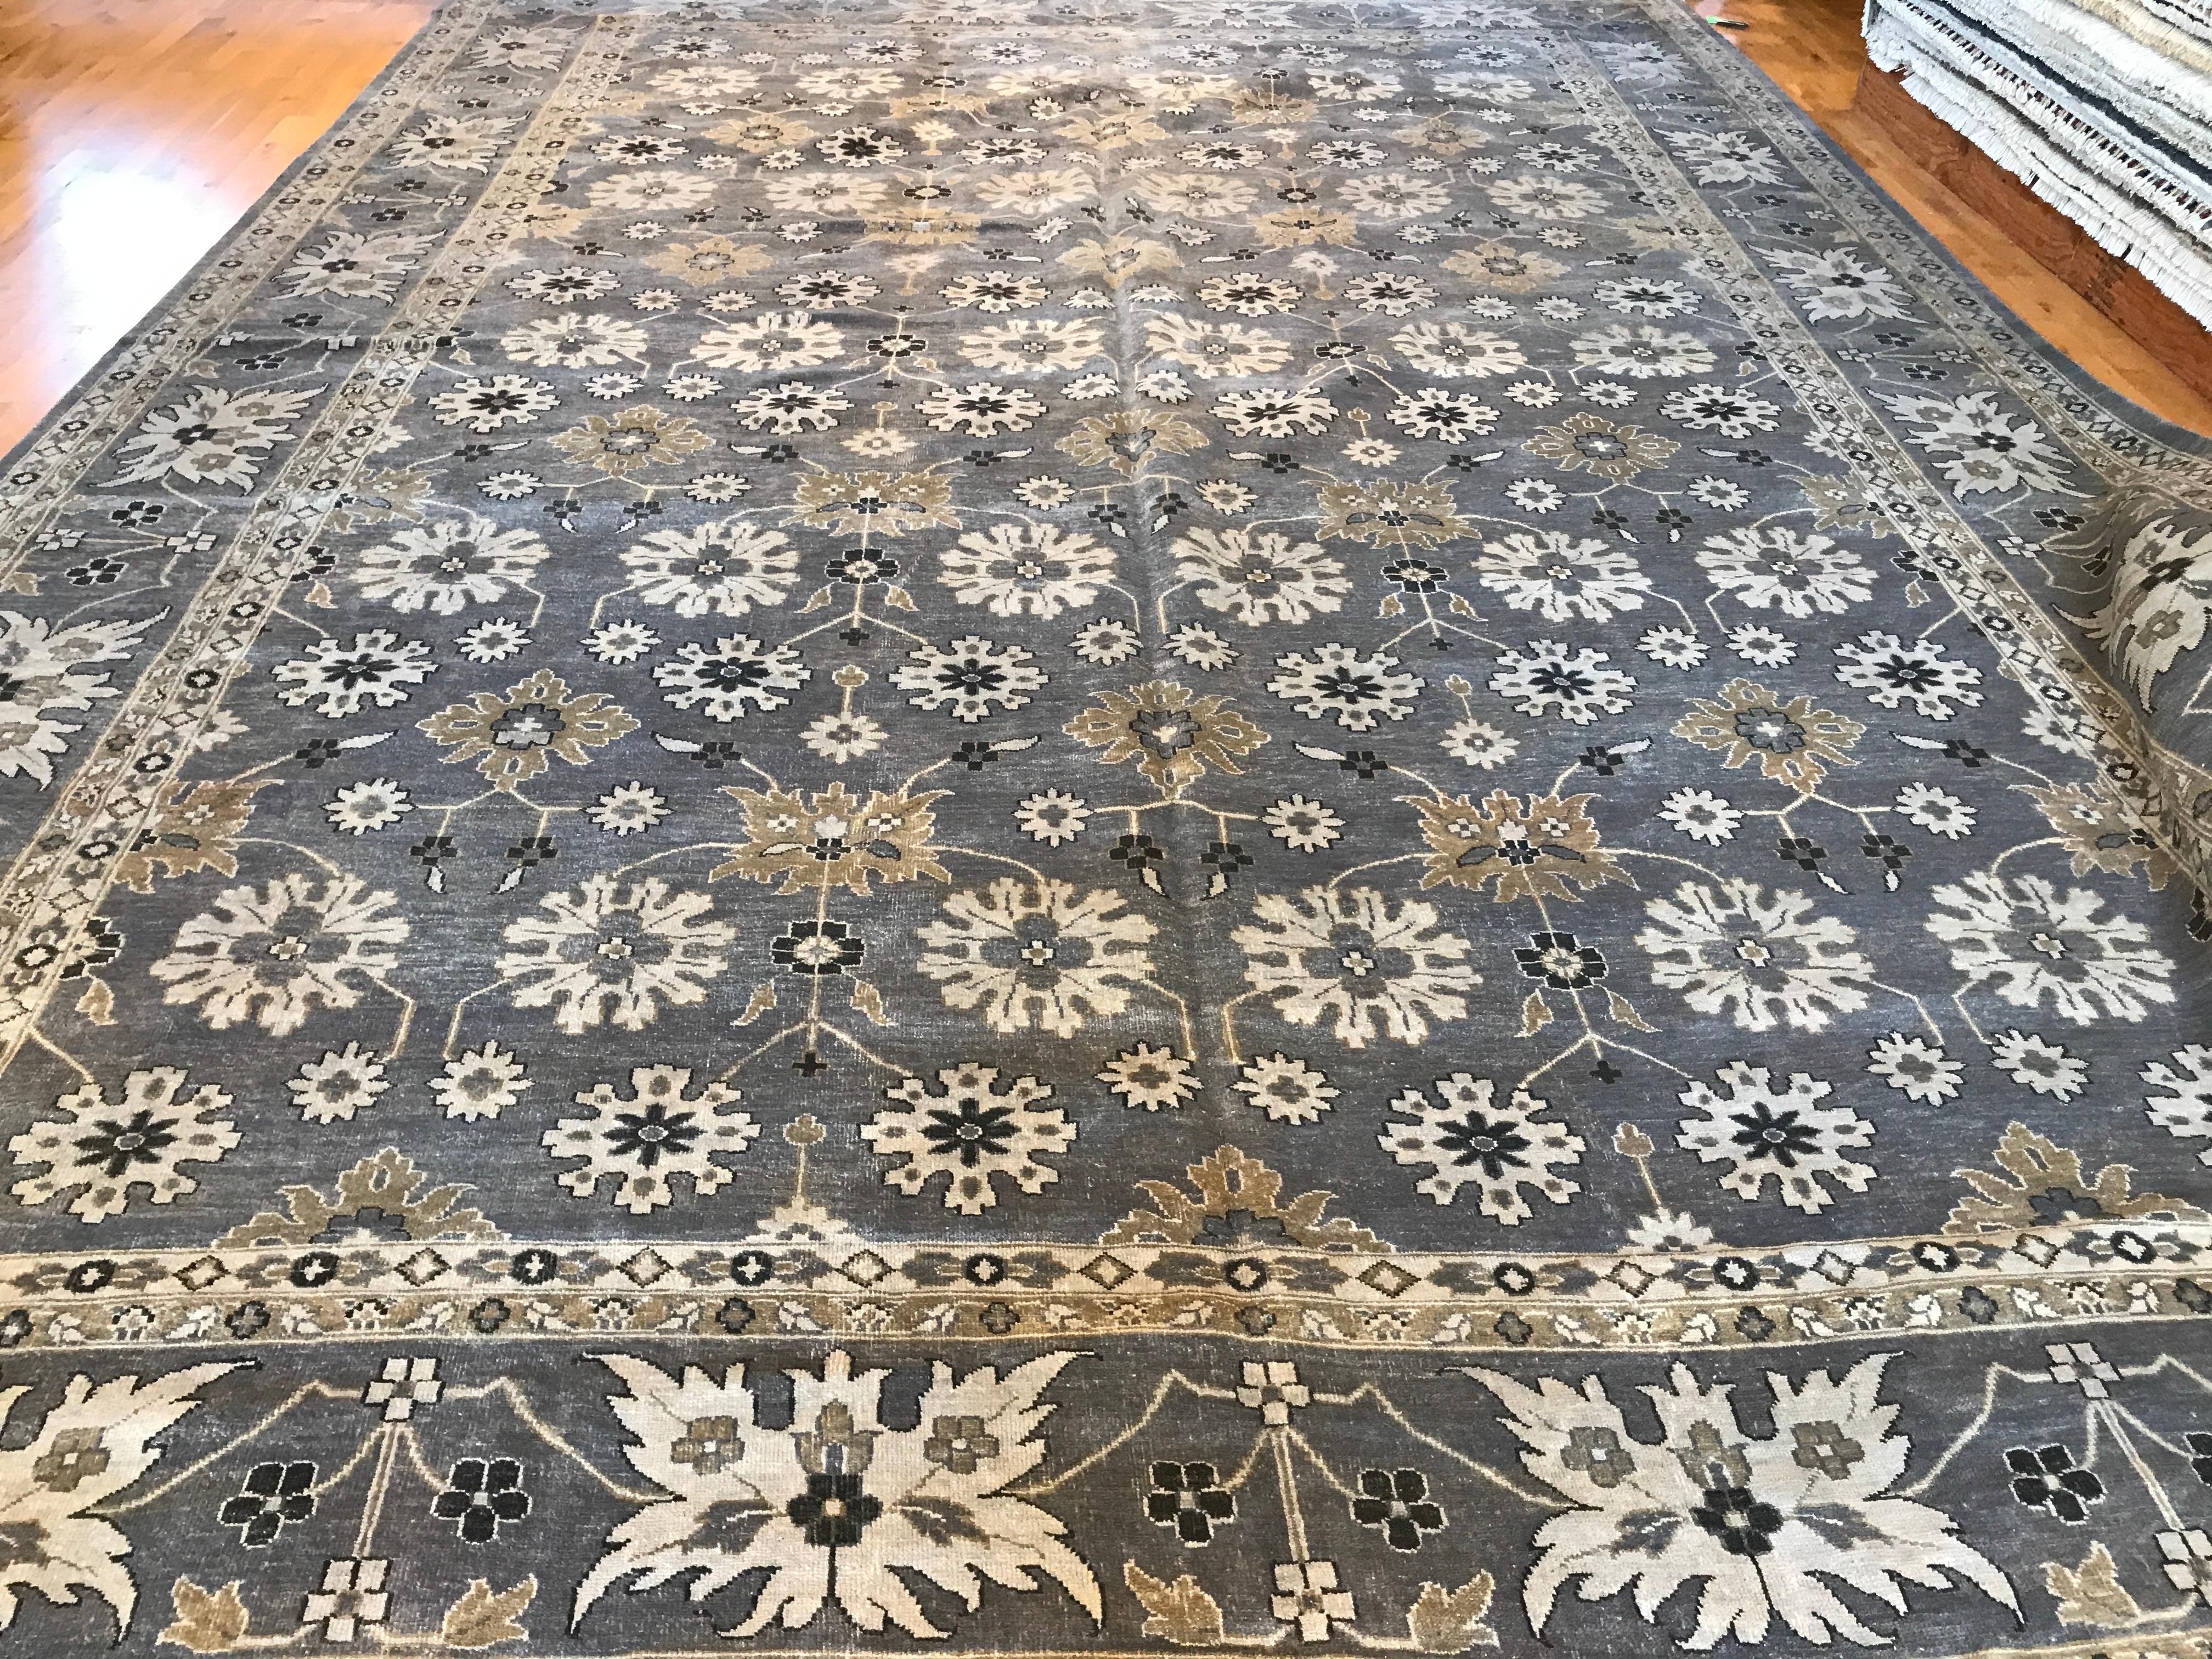 This Indian Oushak rug features a reds floral design  allowing you to switch up your decor. Add a touch of style to any room while also having the option to change things up to suit your mood. Beautiful and versatile, this rug is a must-have for any